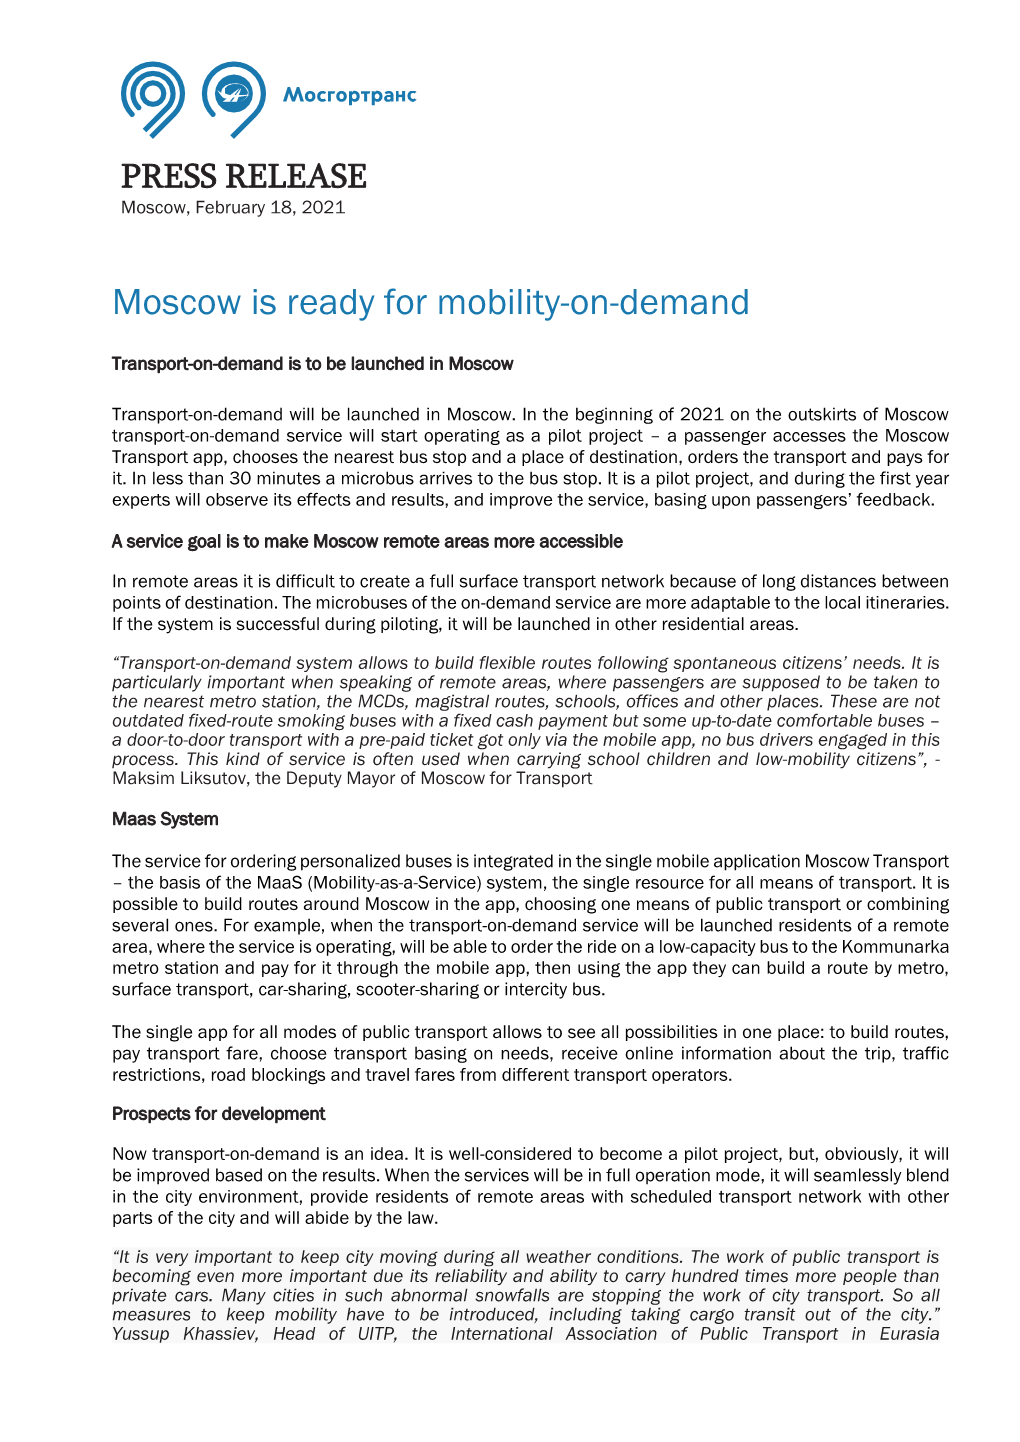 Moscow Is Ready for Mobility-On-Demand